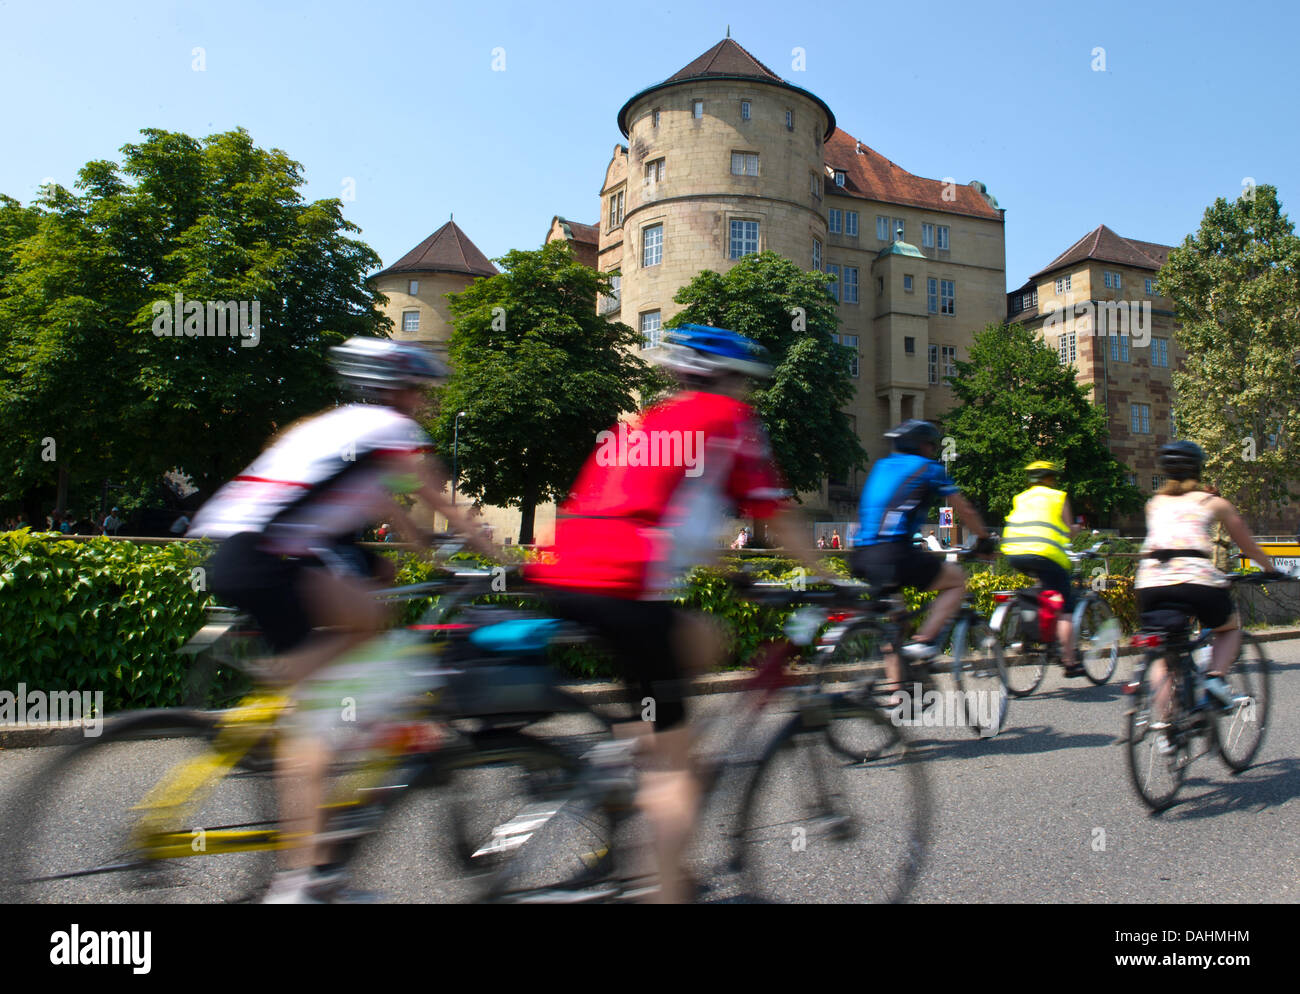 Participants cycle past the old castle during the cycling rally (Fahrrad-Sternfahrt) through Stuttgart, Germany, 14 July 2013. Participants started in four different locations to cycle the between 13 and 28 kilometers to Stuttgart. Photo: DANIEL BOCKWOLDT Stock Photo